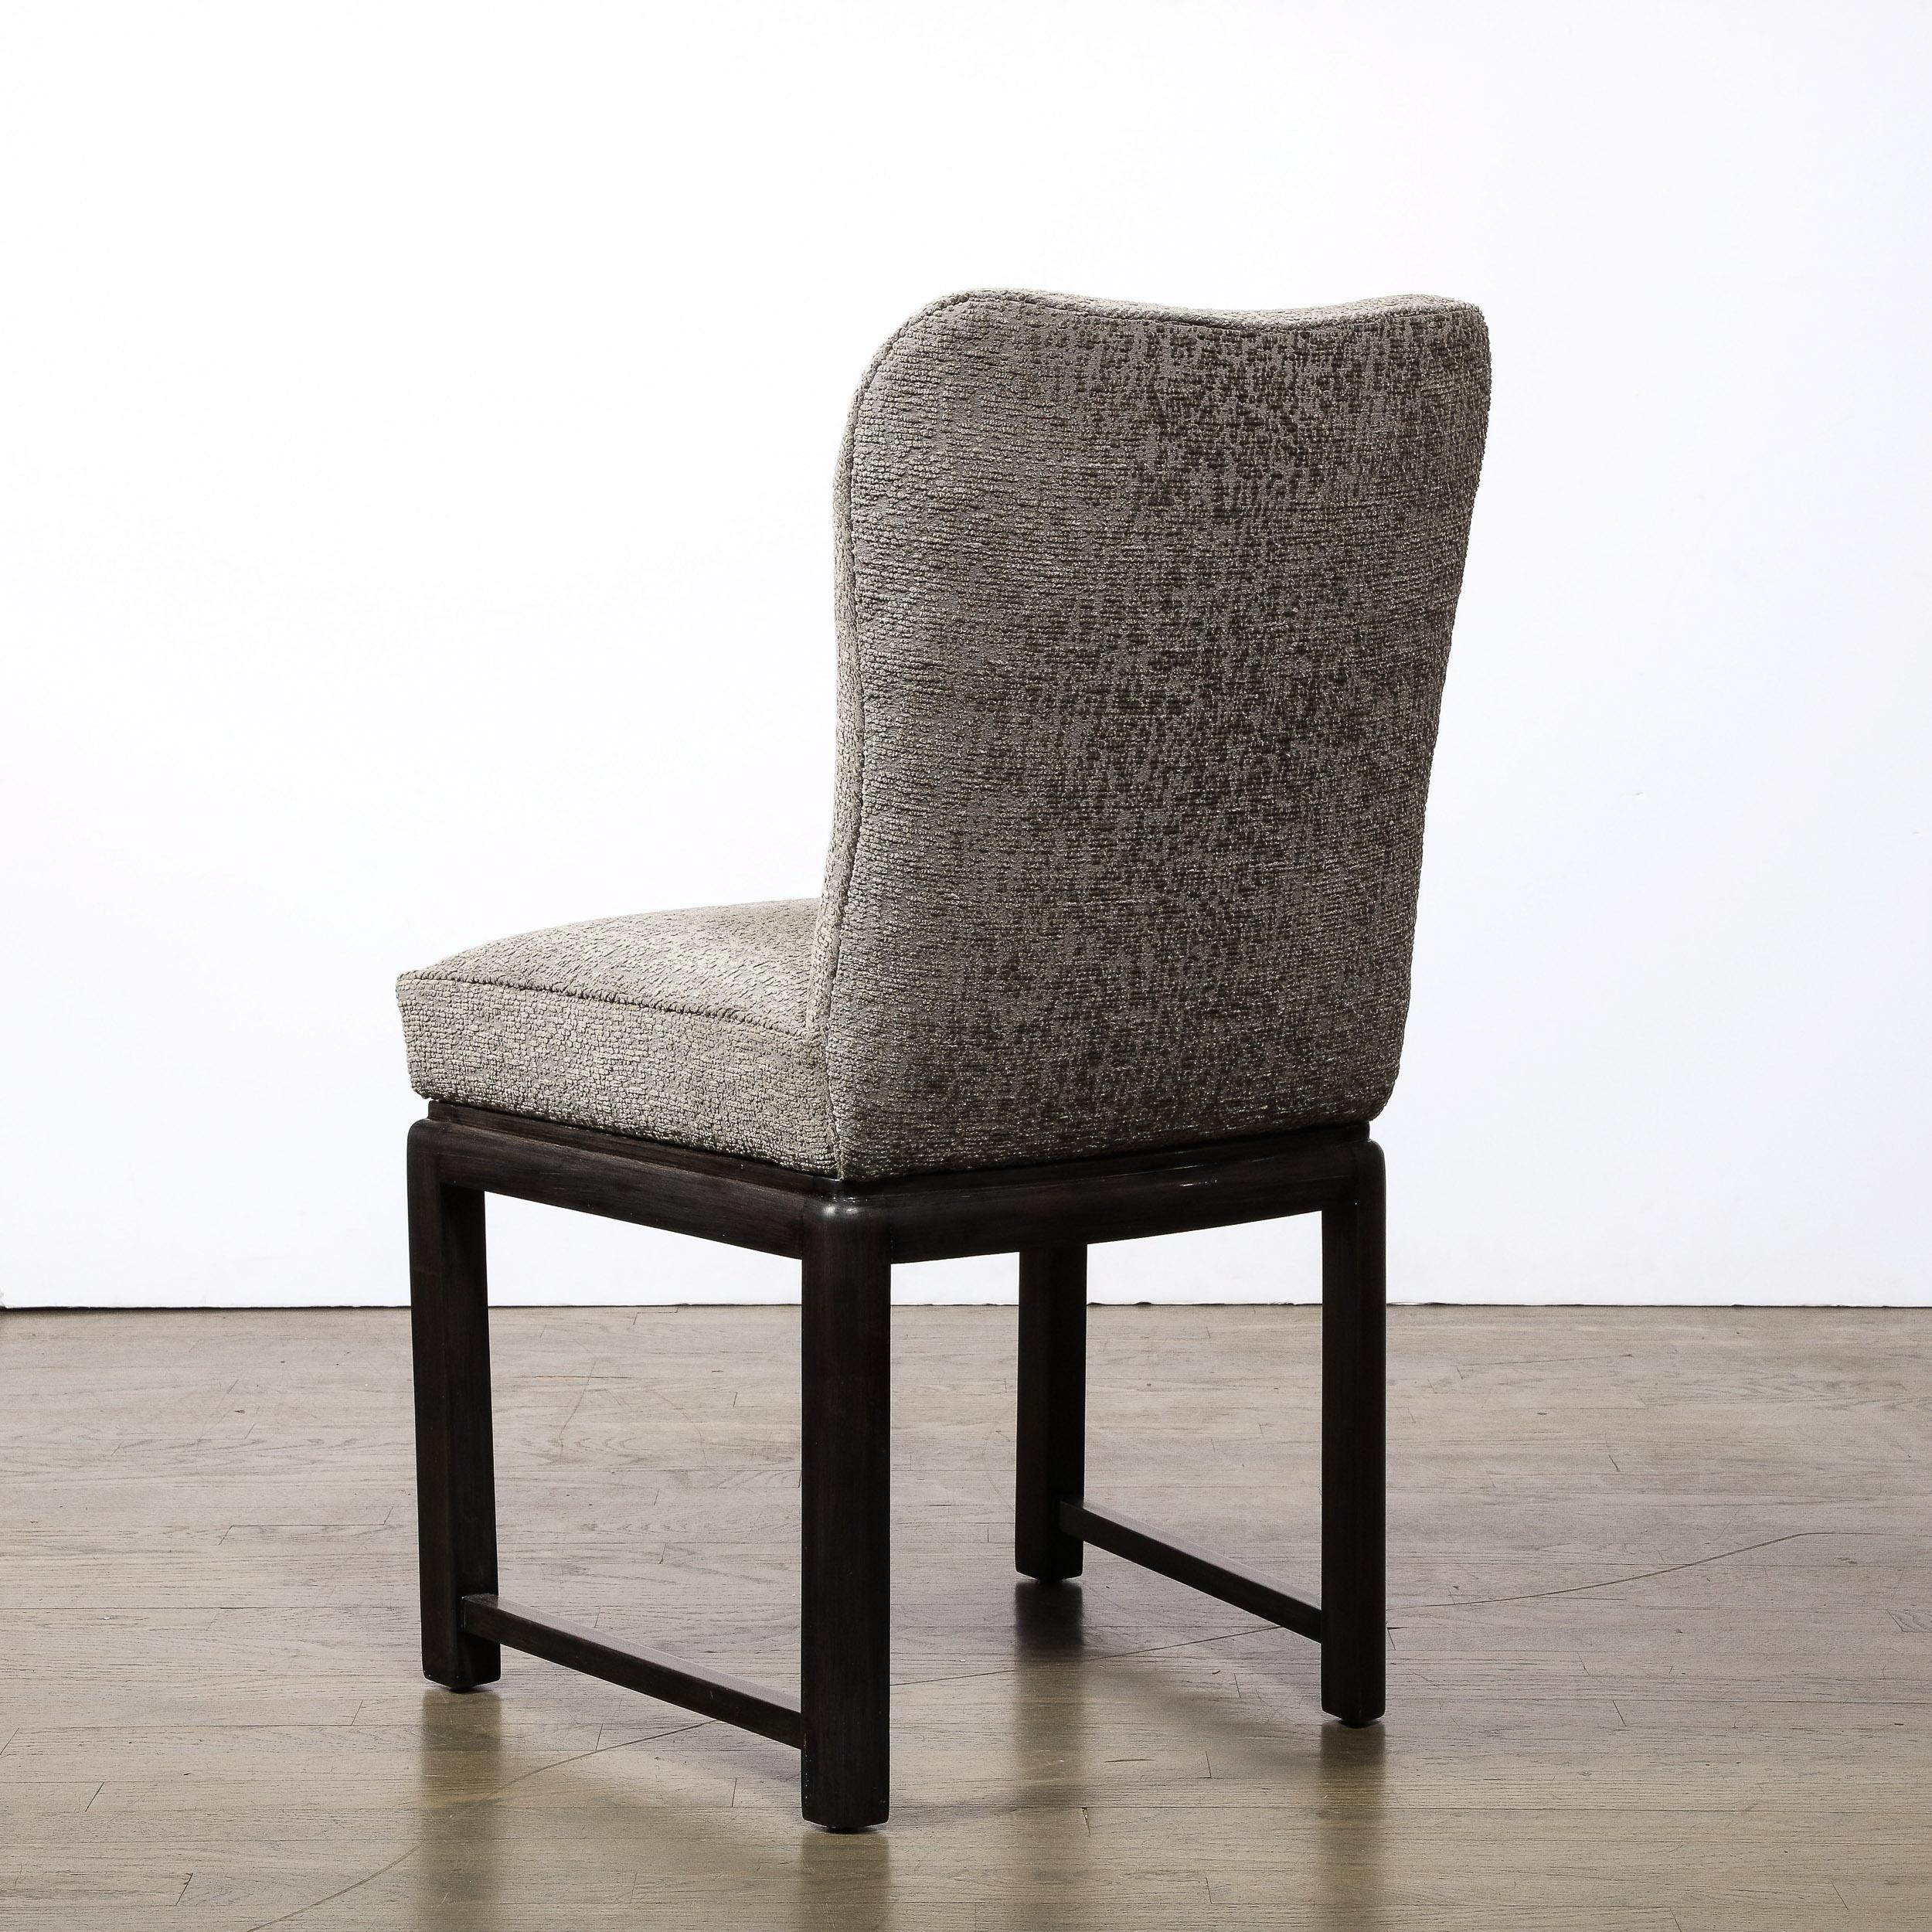 Mid-20th Century Mid-Century Chair in Ebonized Walnut Base with Holly Hunt Fabric For Sale